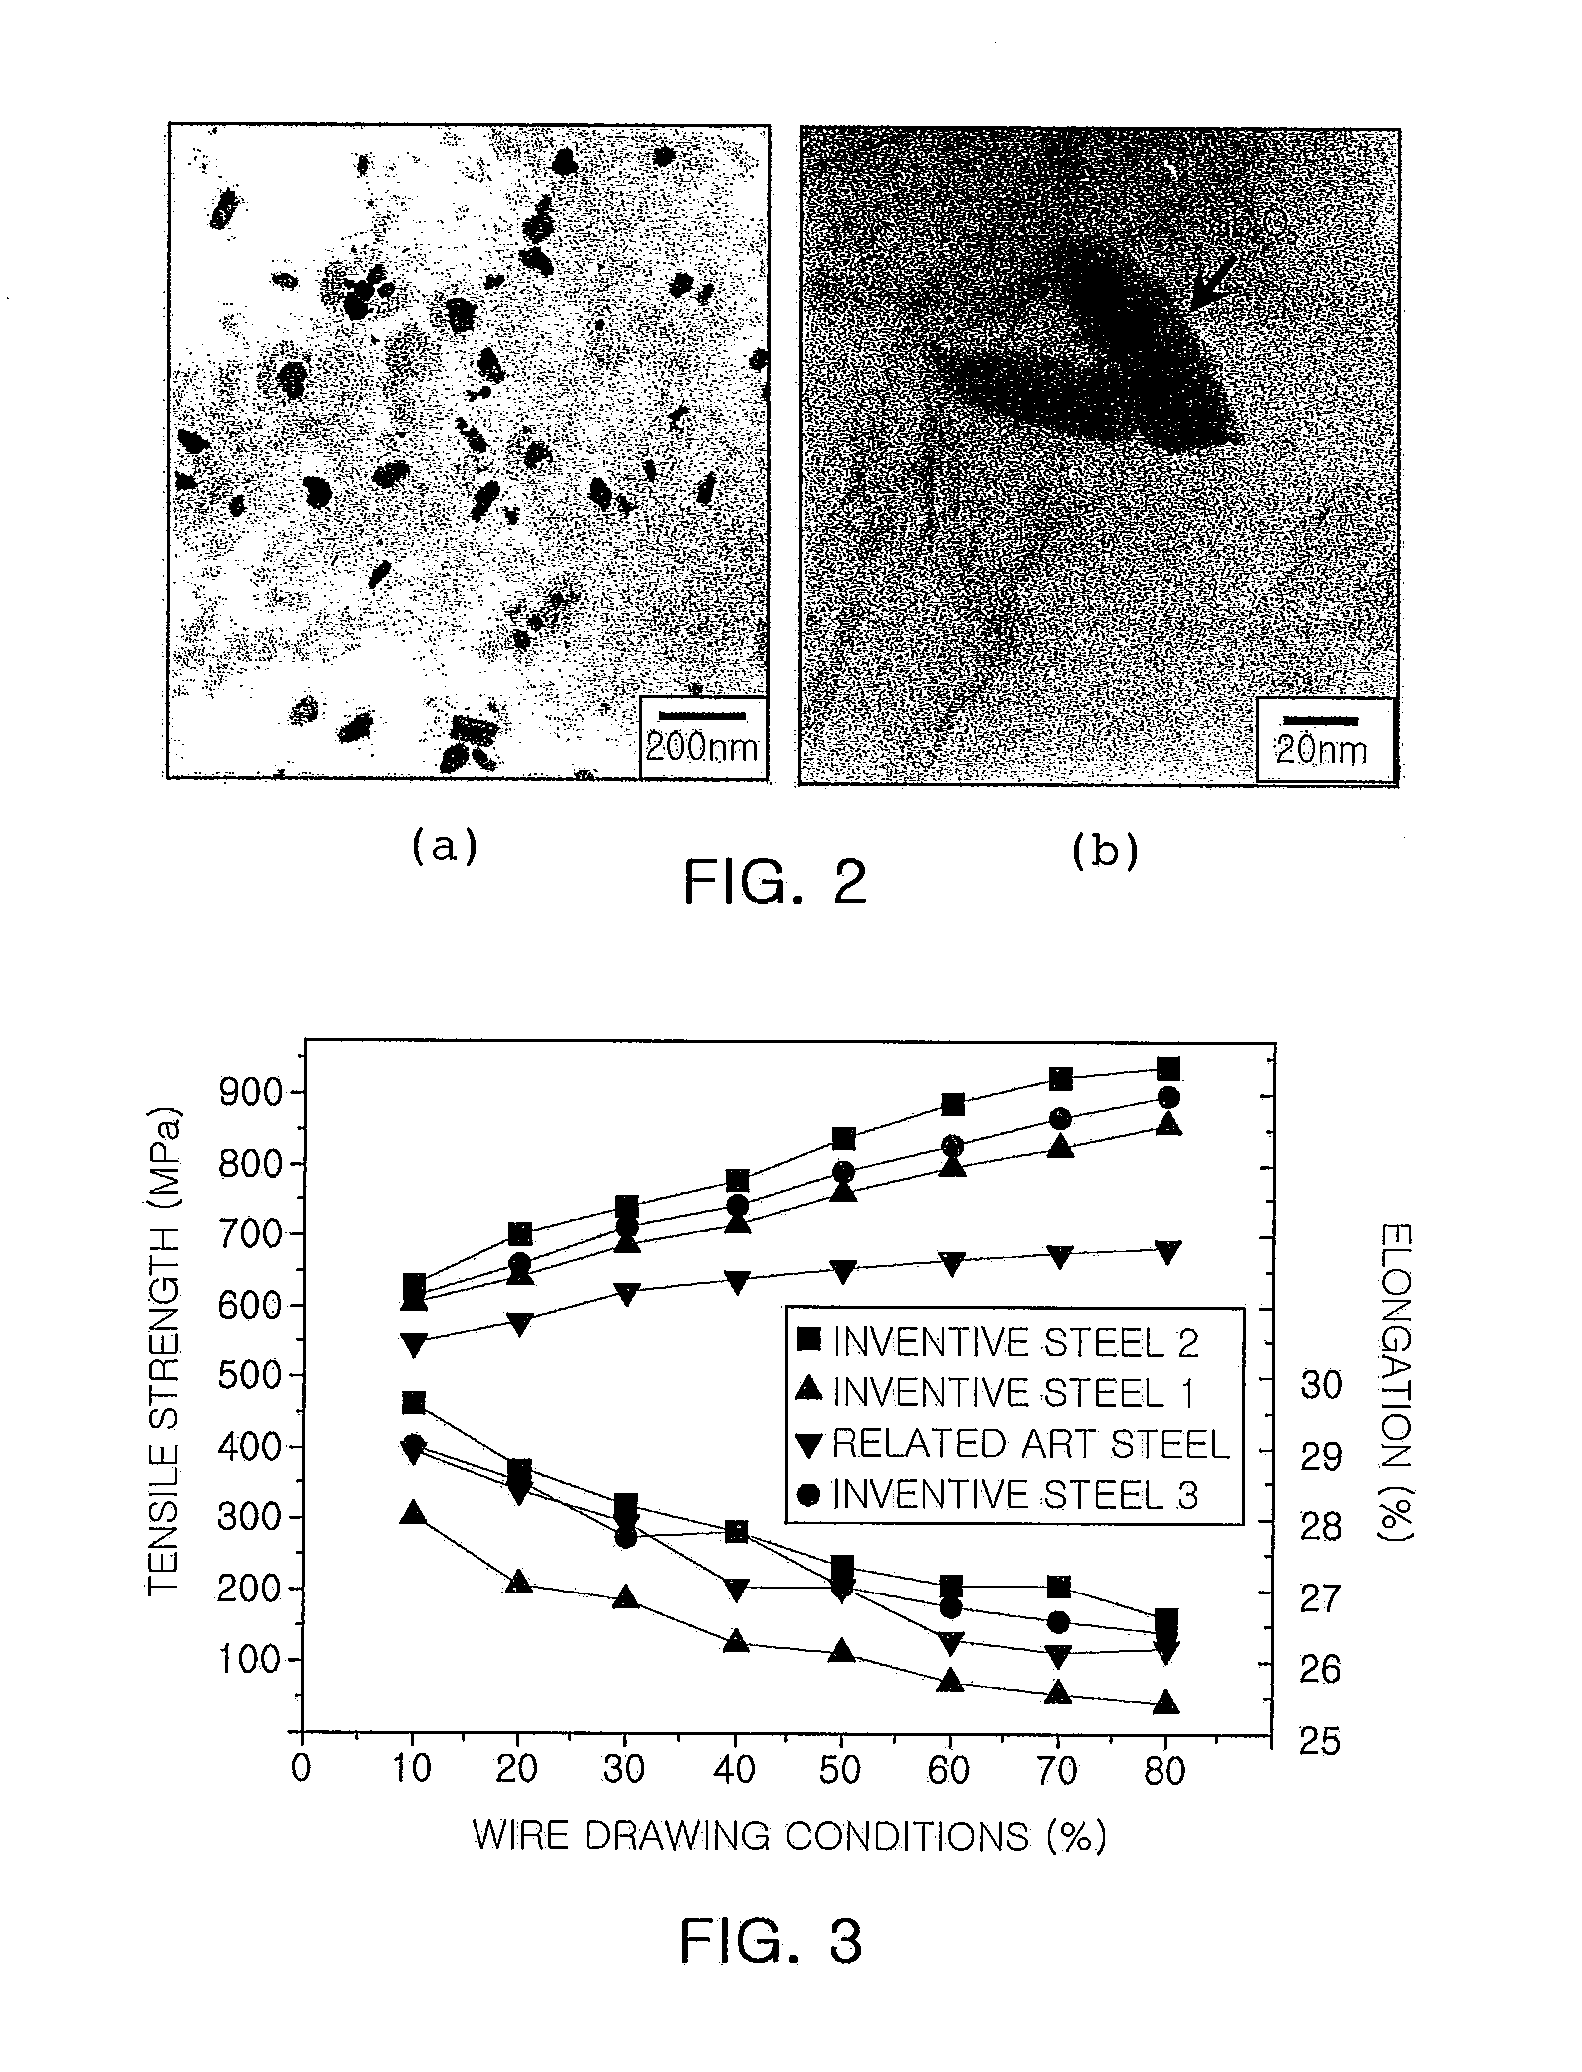 Wire rod having good superior surface properties, high strength, and high toughness, and a method for manufacturing same